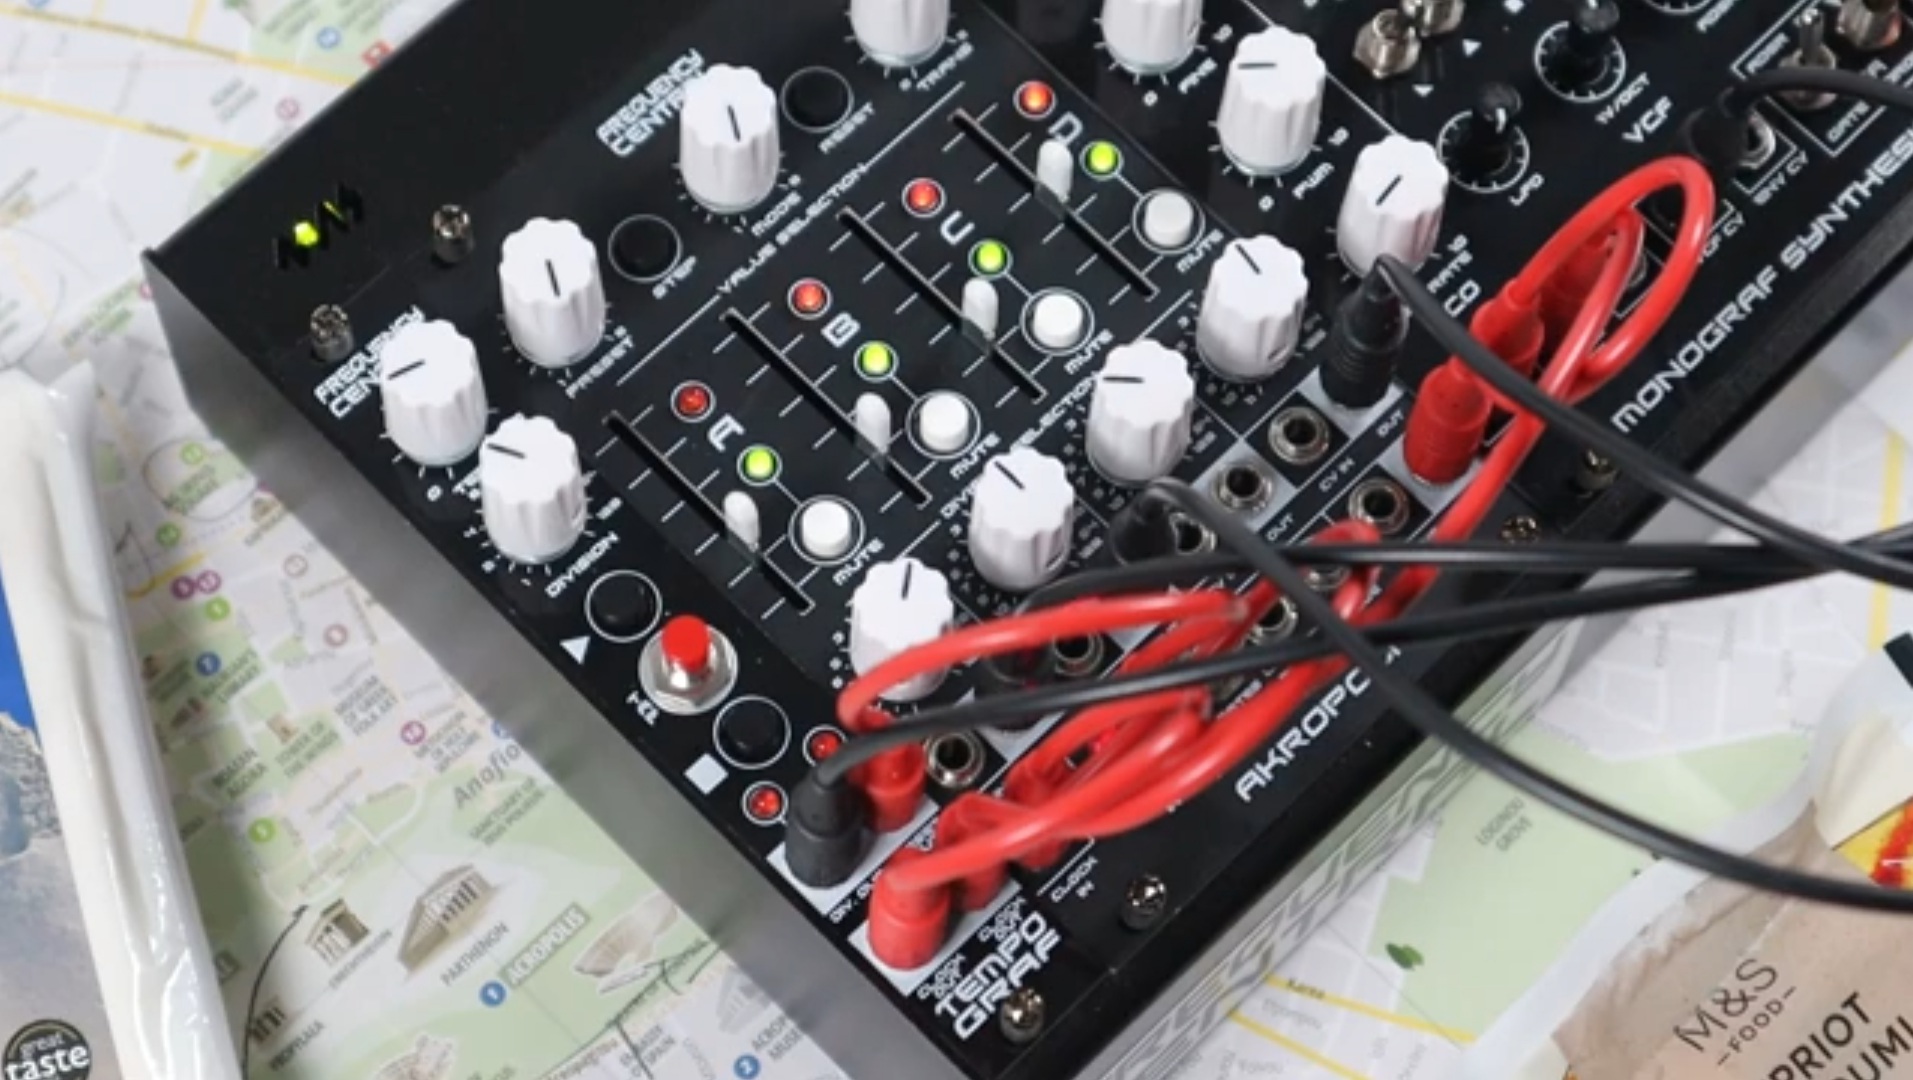 Frequency Central Feat. AKROPOLI advanced generative sequencer